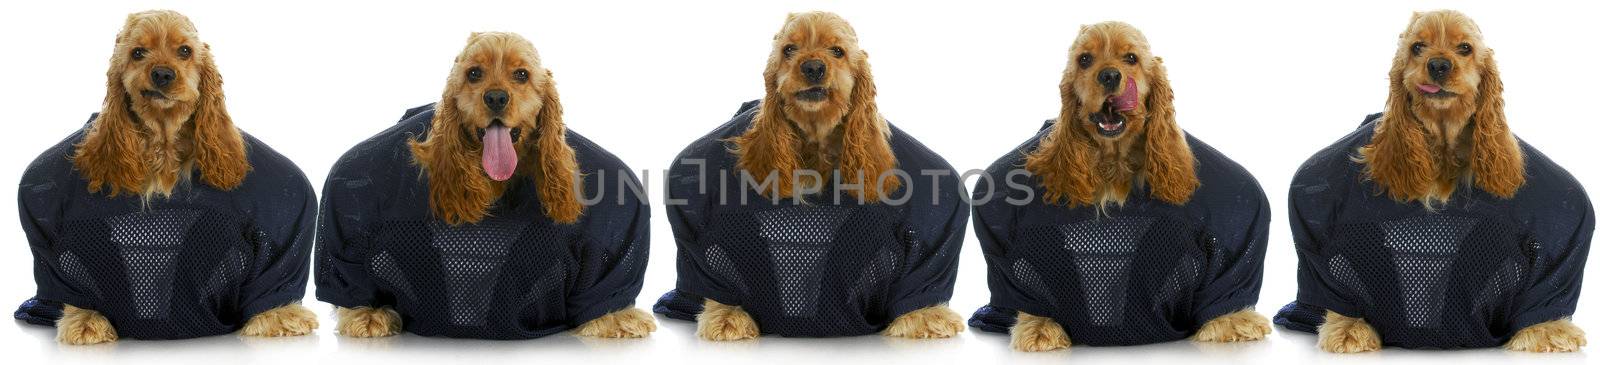 sports hounds - line up of cocker spaniels wearing football jerseys isolted on white background